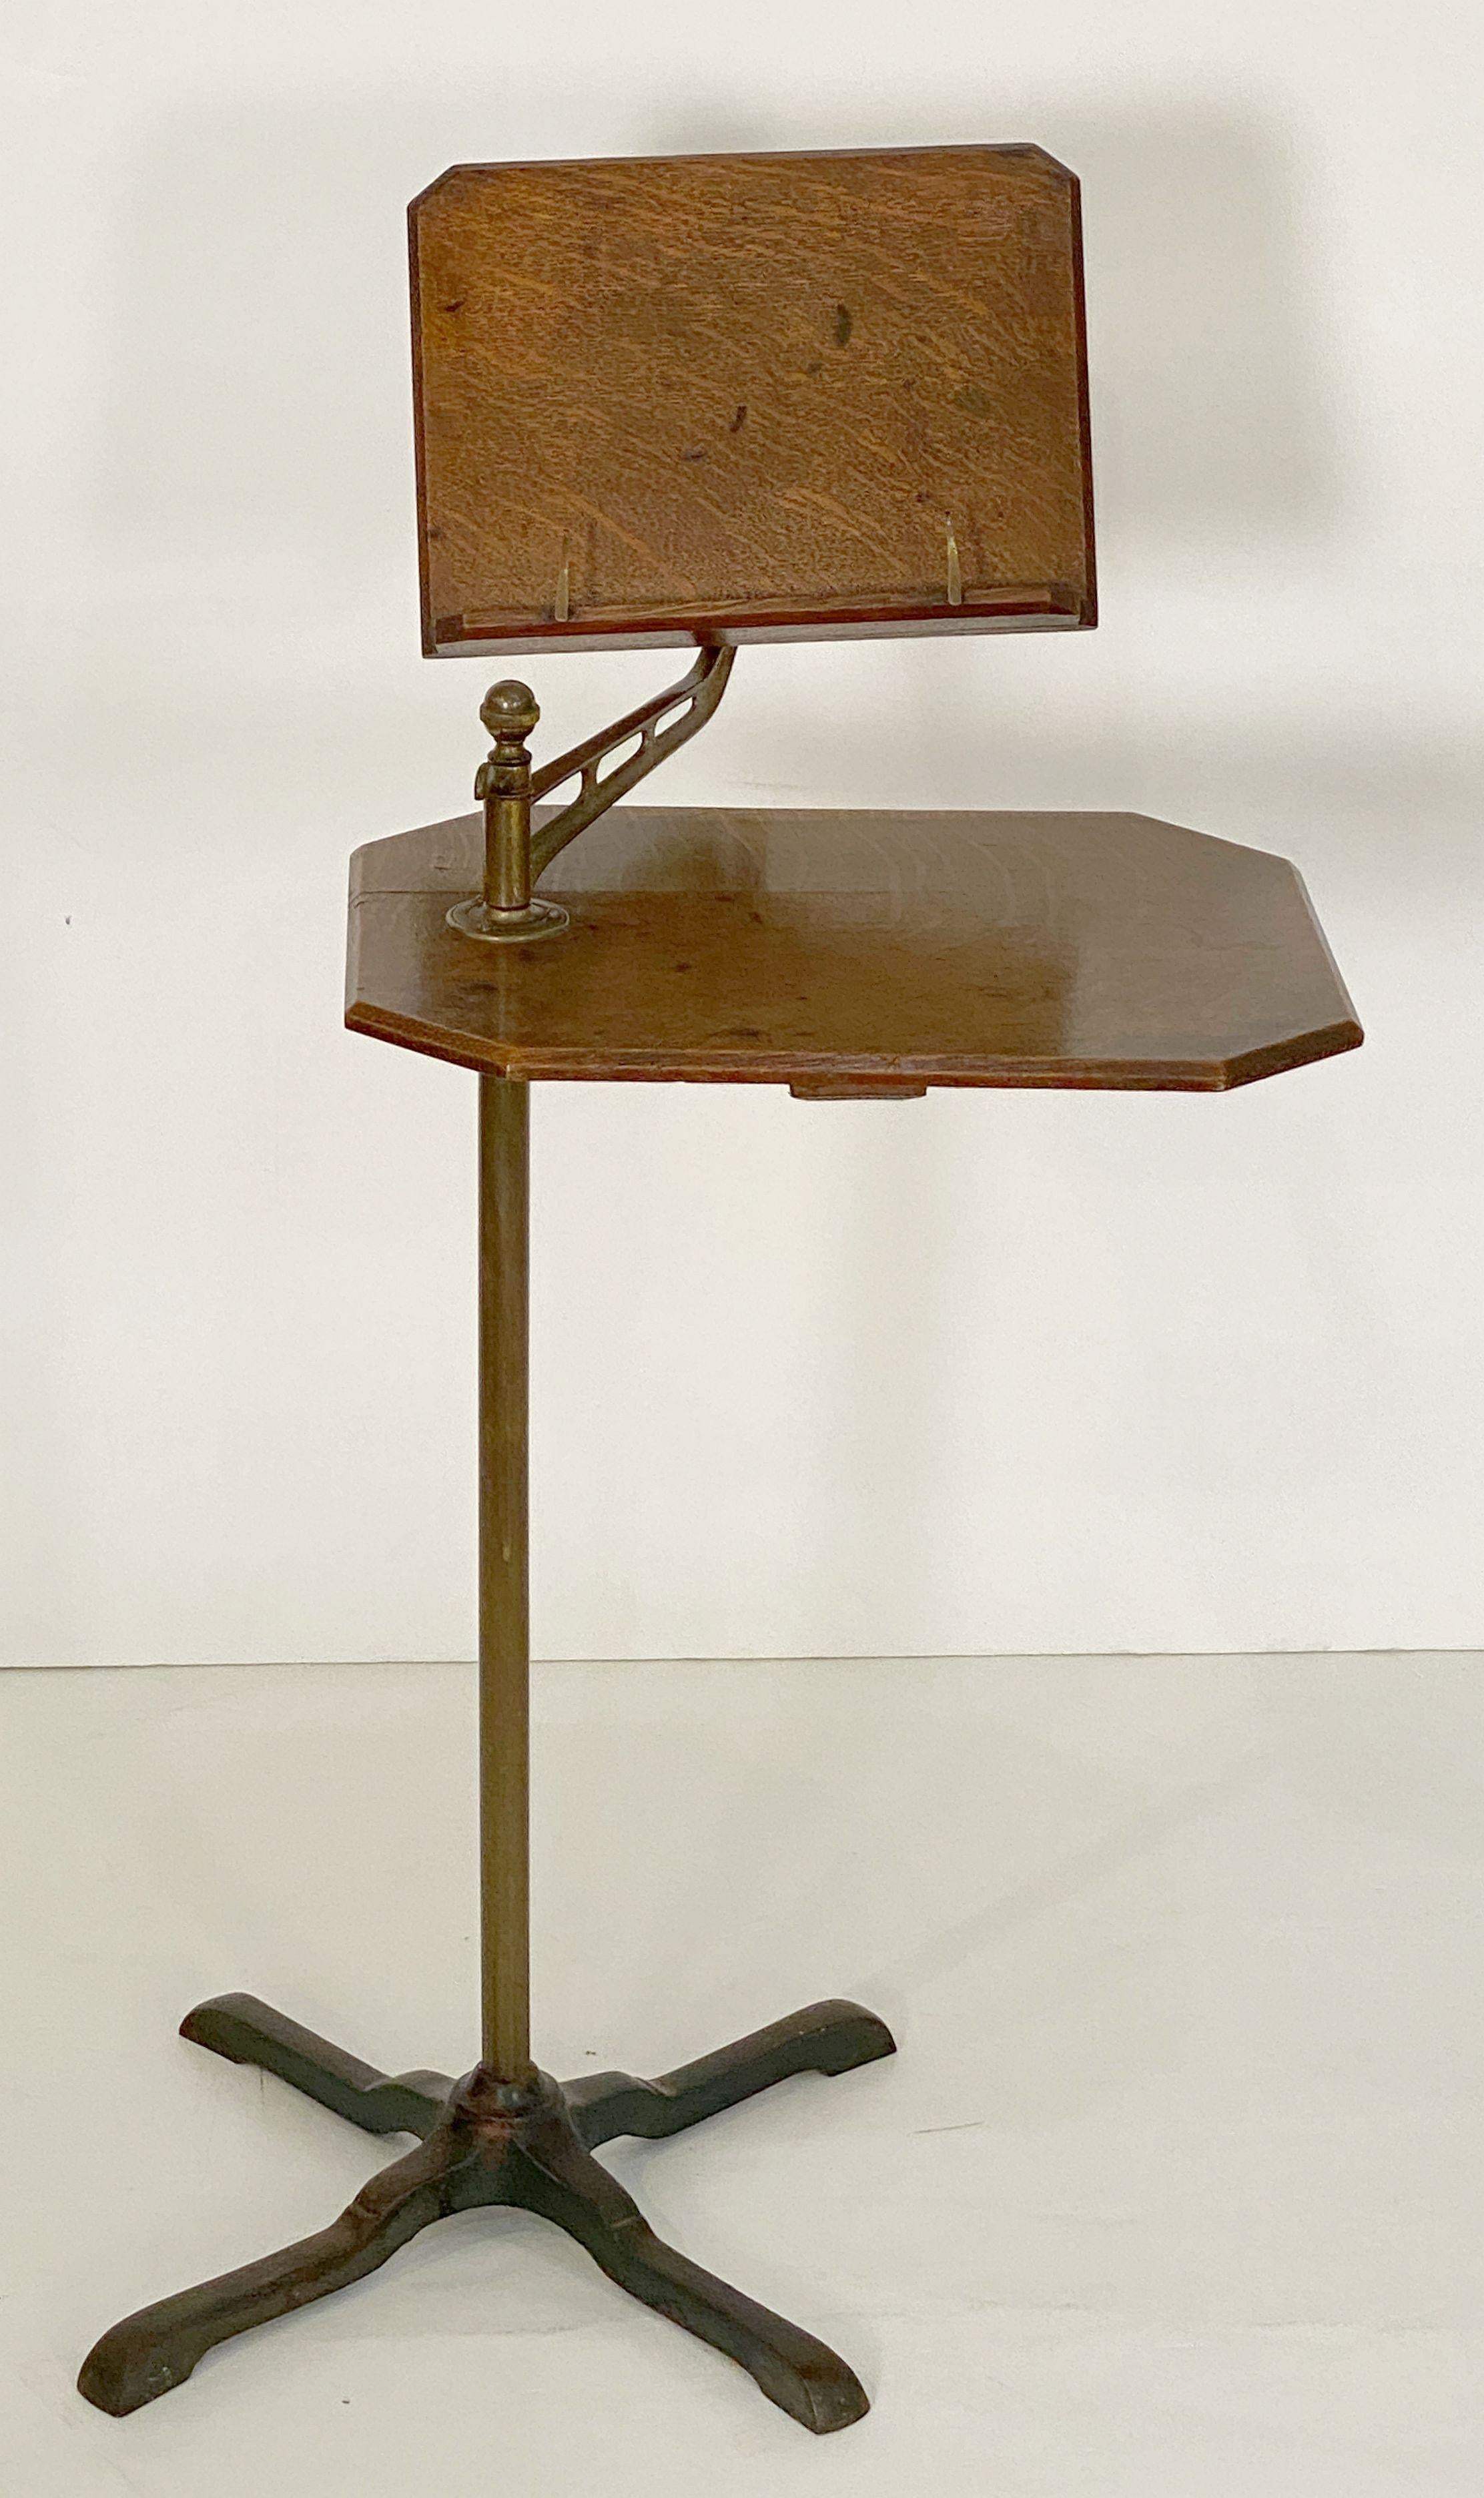 English Adjustable Floor-Standing Book Lectern or Reading Stand 8